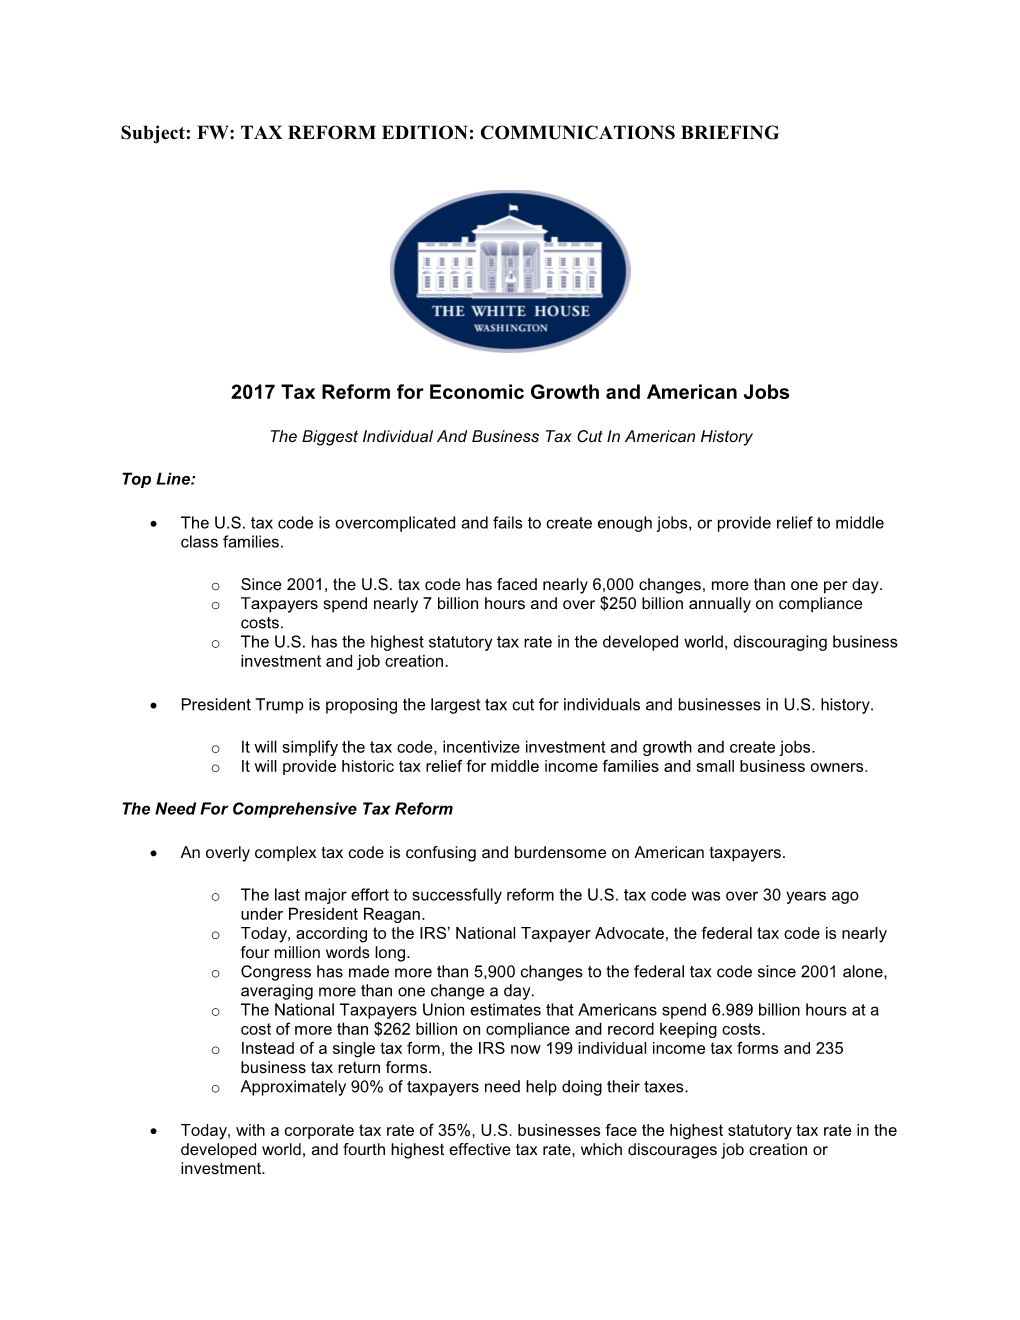 Subject: FW: TAX REFORM EDITION: COMMUNICATIONS BRIEFING